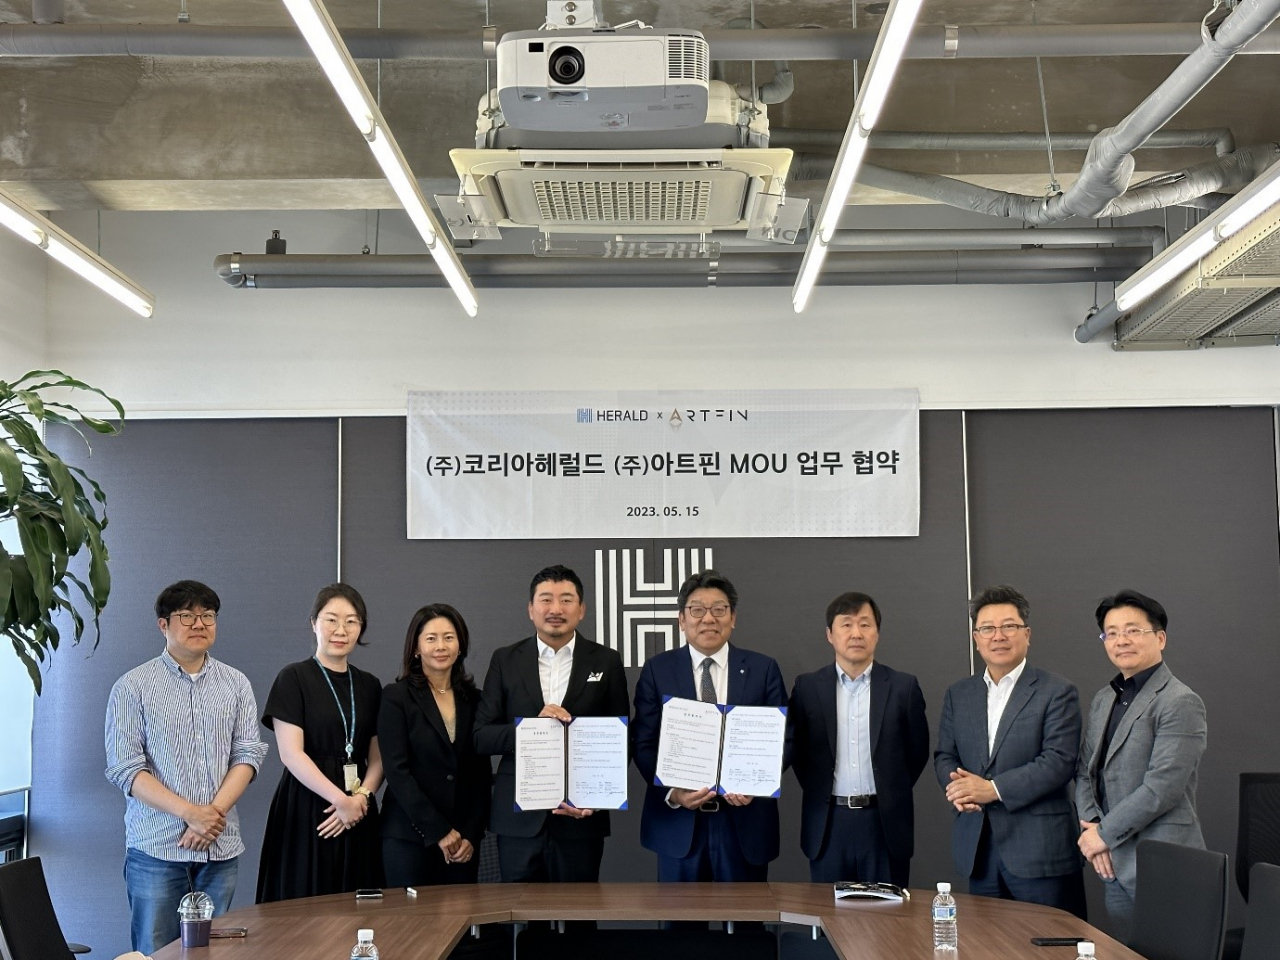 TGS Group CEO Lee Jae-sun (fourth from left) and The Korea Herald CEO Choi Jin-young (fifth from left) pose for a photo during a signing ceremony for a memorandum of understanding. (The Korea Herald)